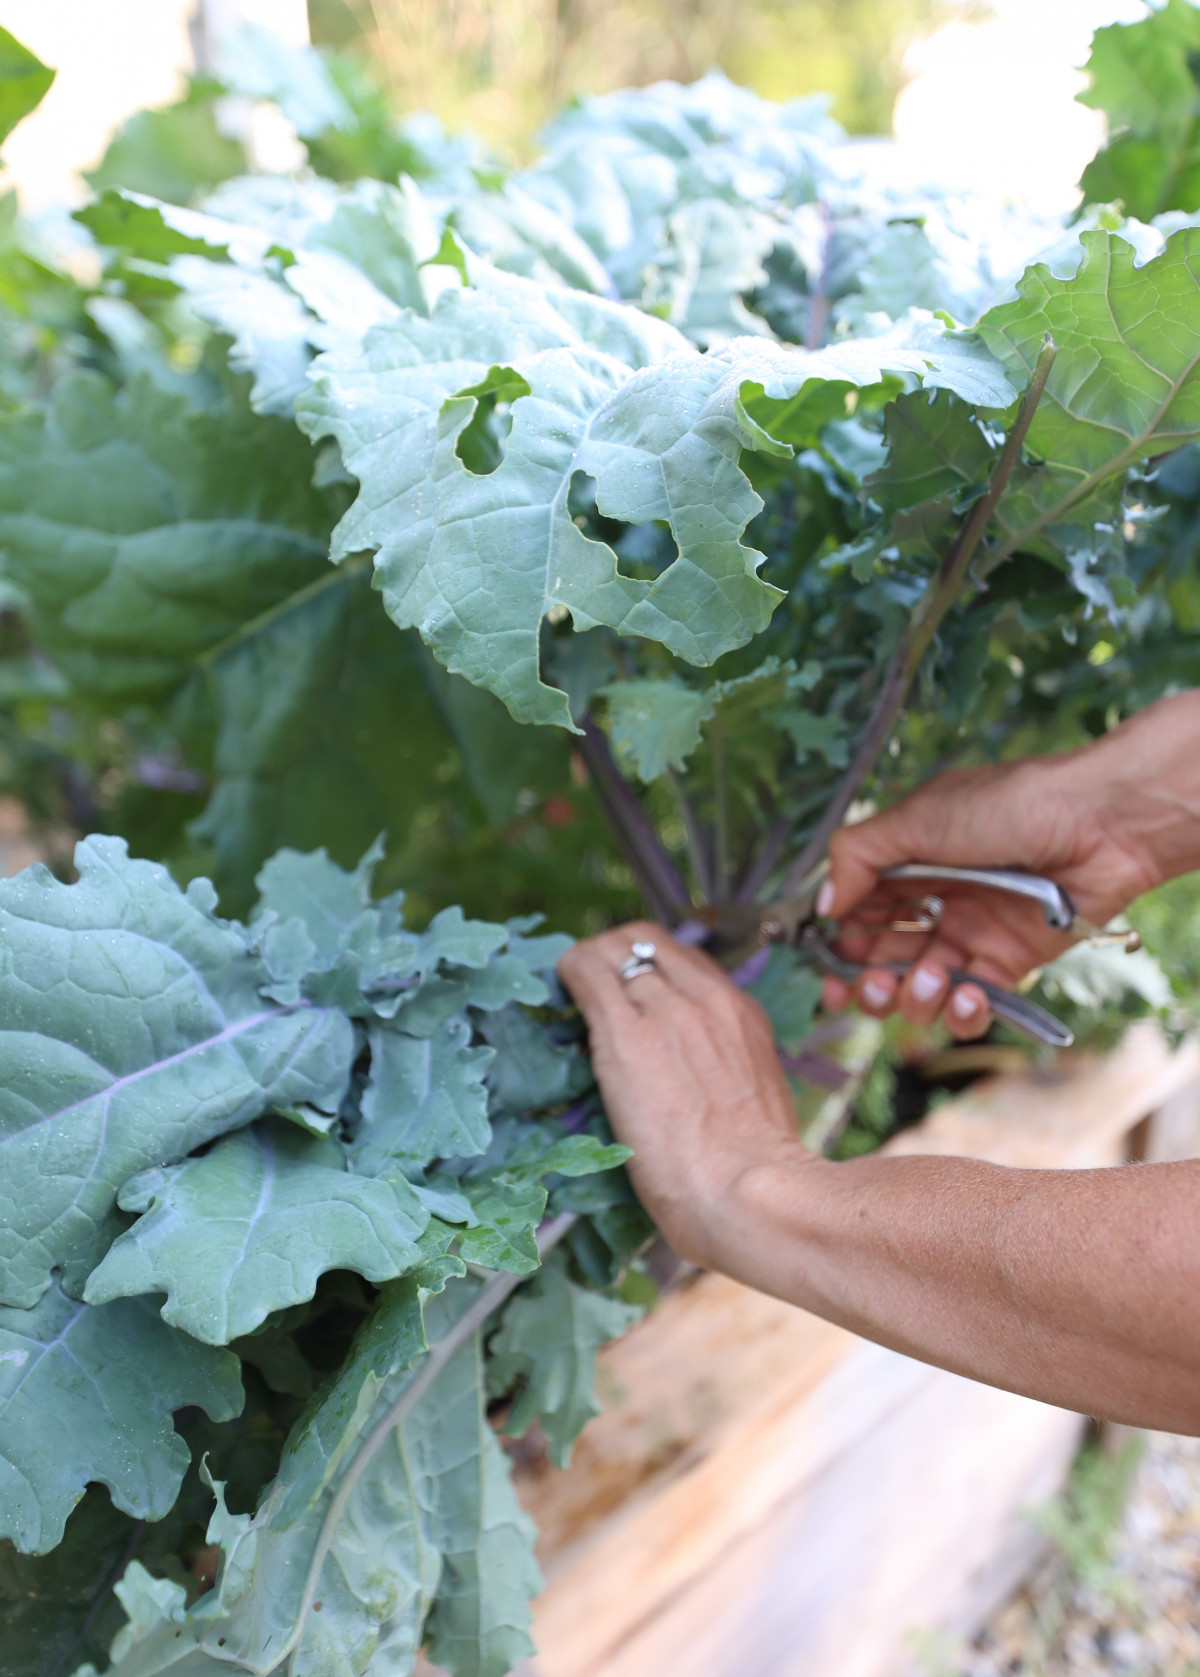 Exploring Kale: Find Fresh and Local Kale Plants in Your Area